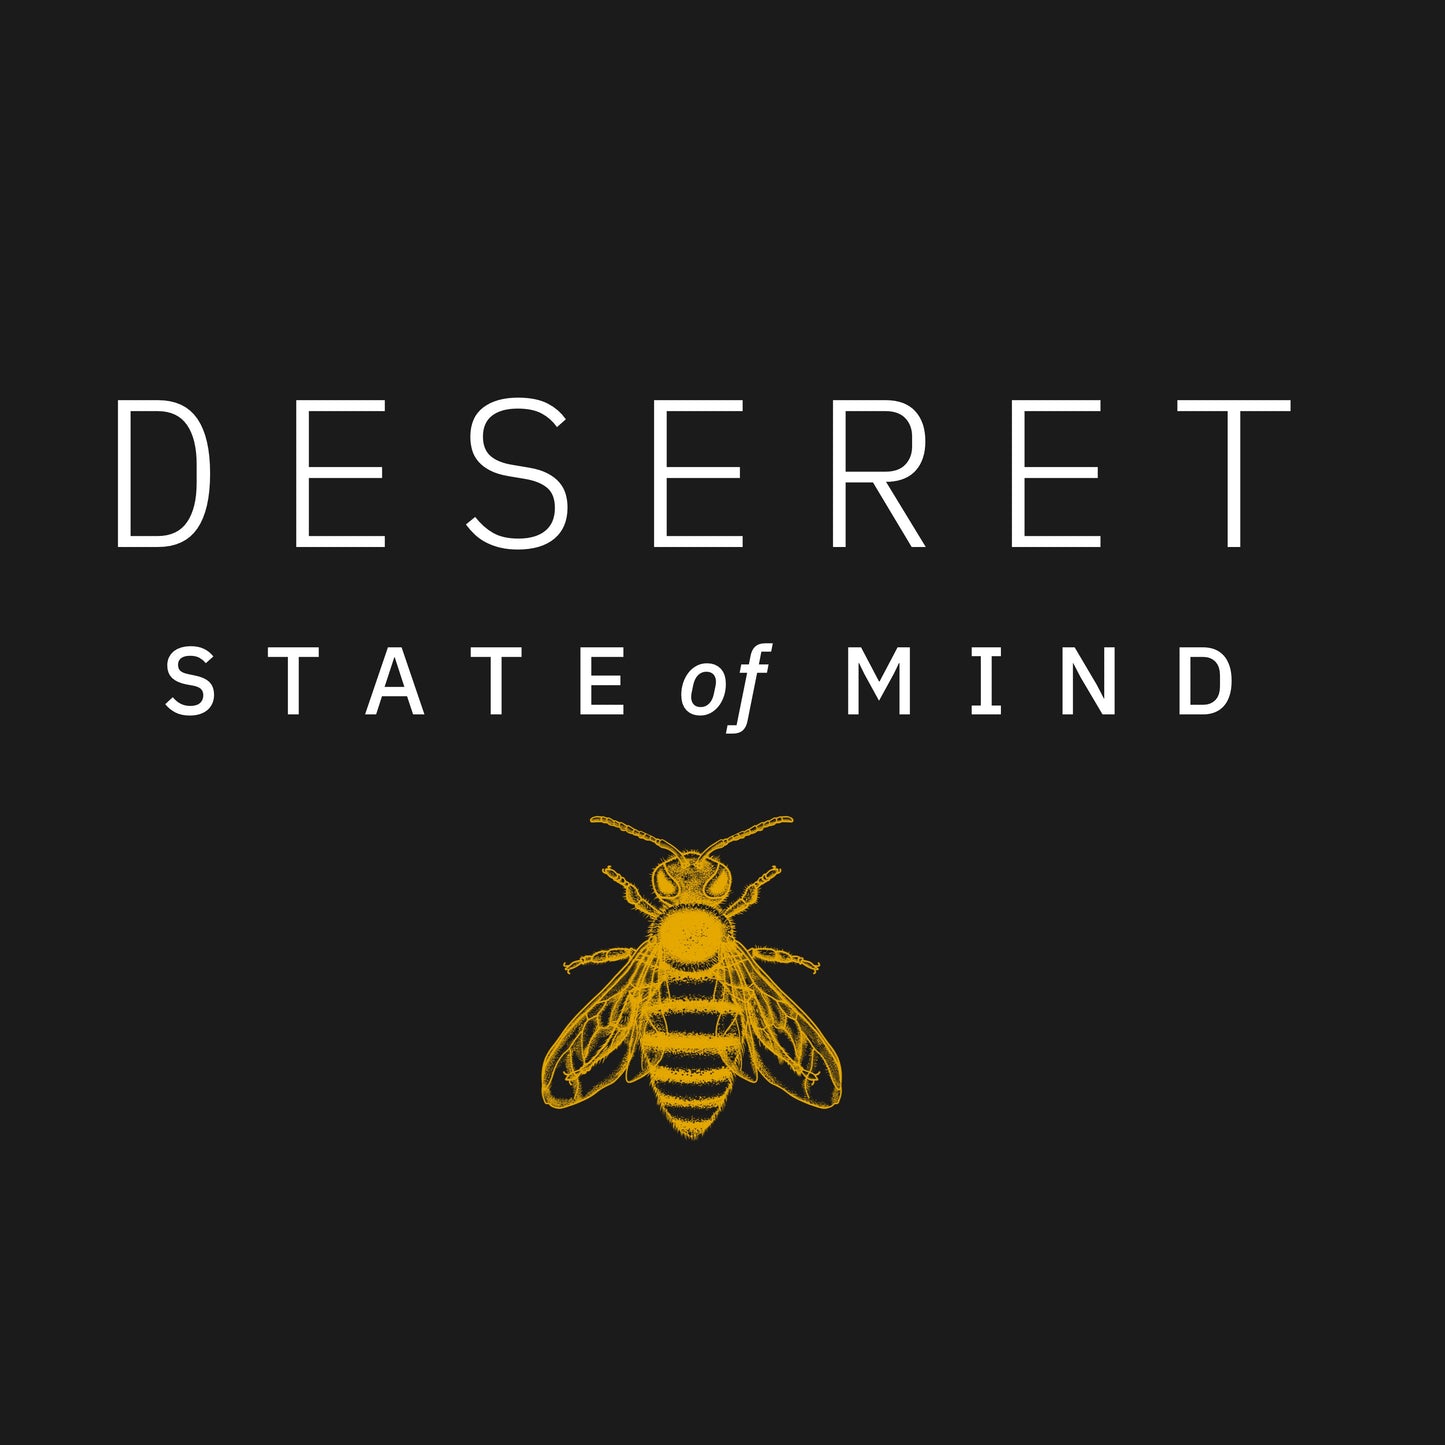 Deseret State of Mind Shirt - Mens Short Sleeve T-shirt in Black and Yellow